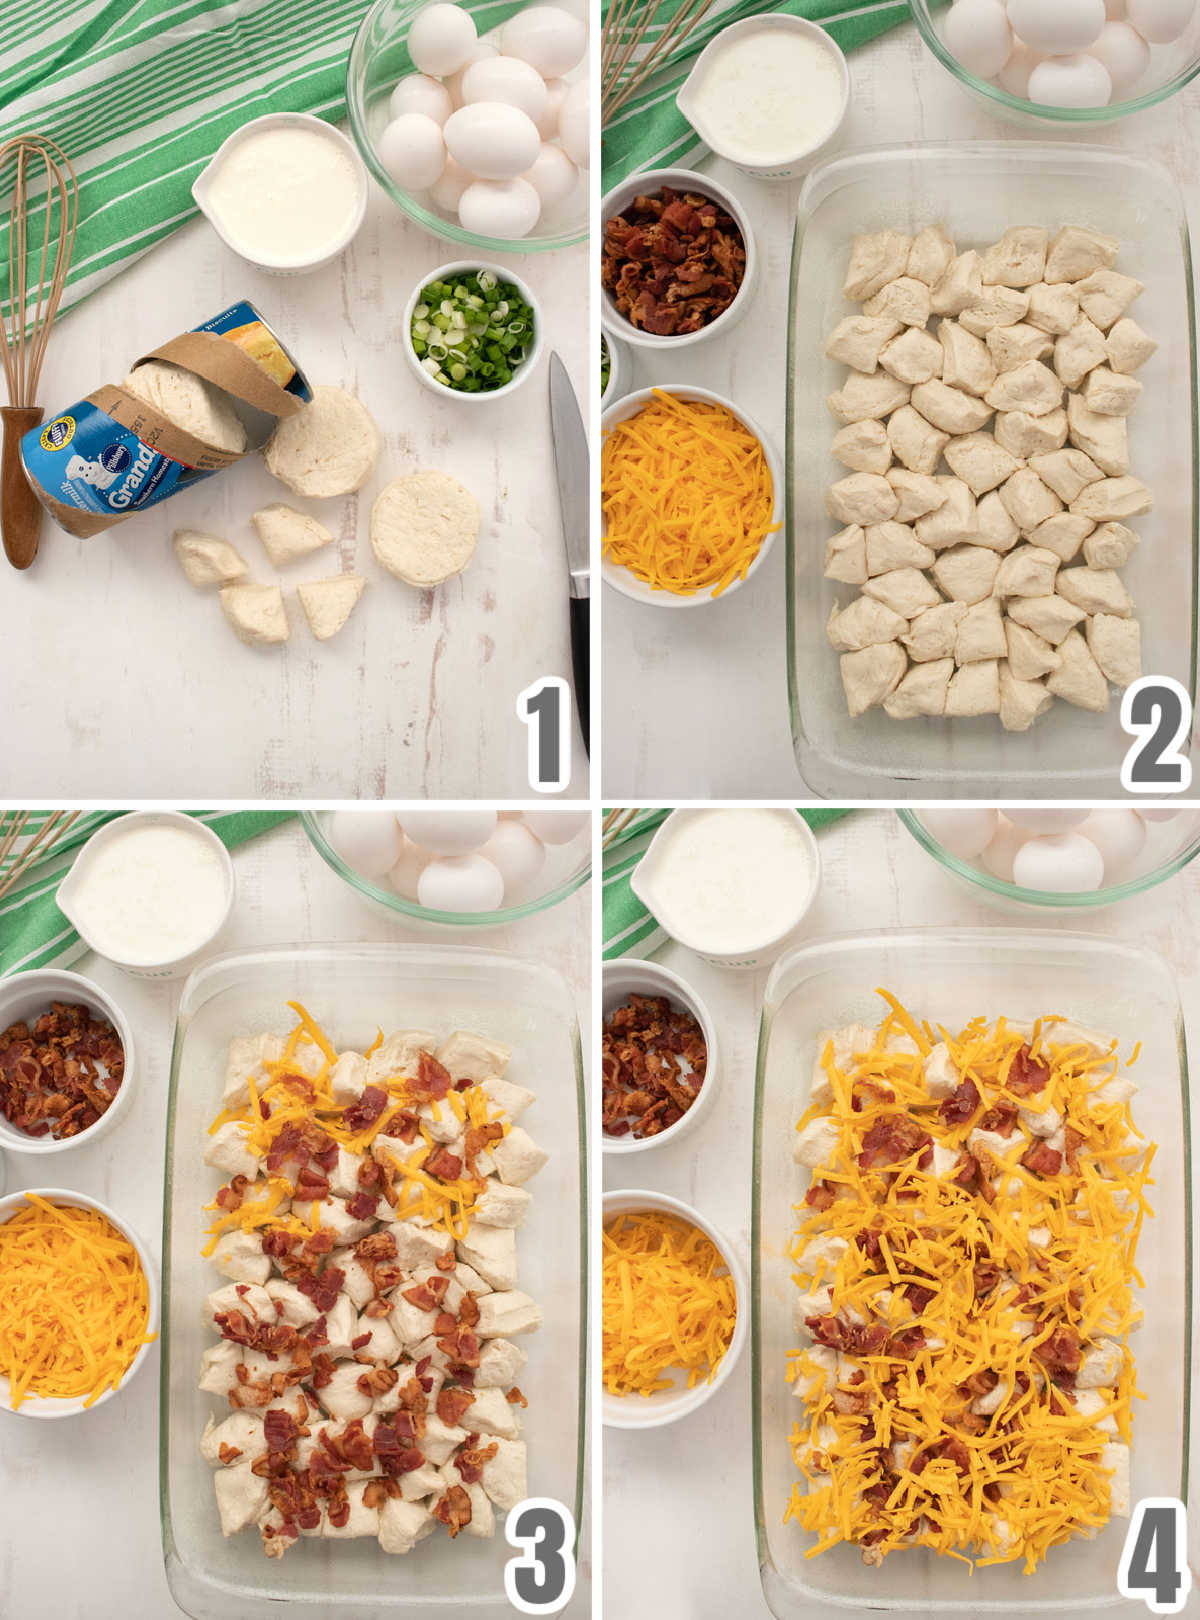 Collage image showing the steps for arranging the biscuits pieces in the baking pan for the biscuit casserole.